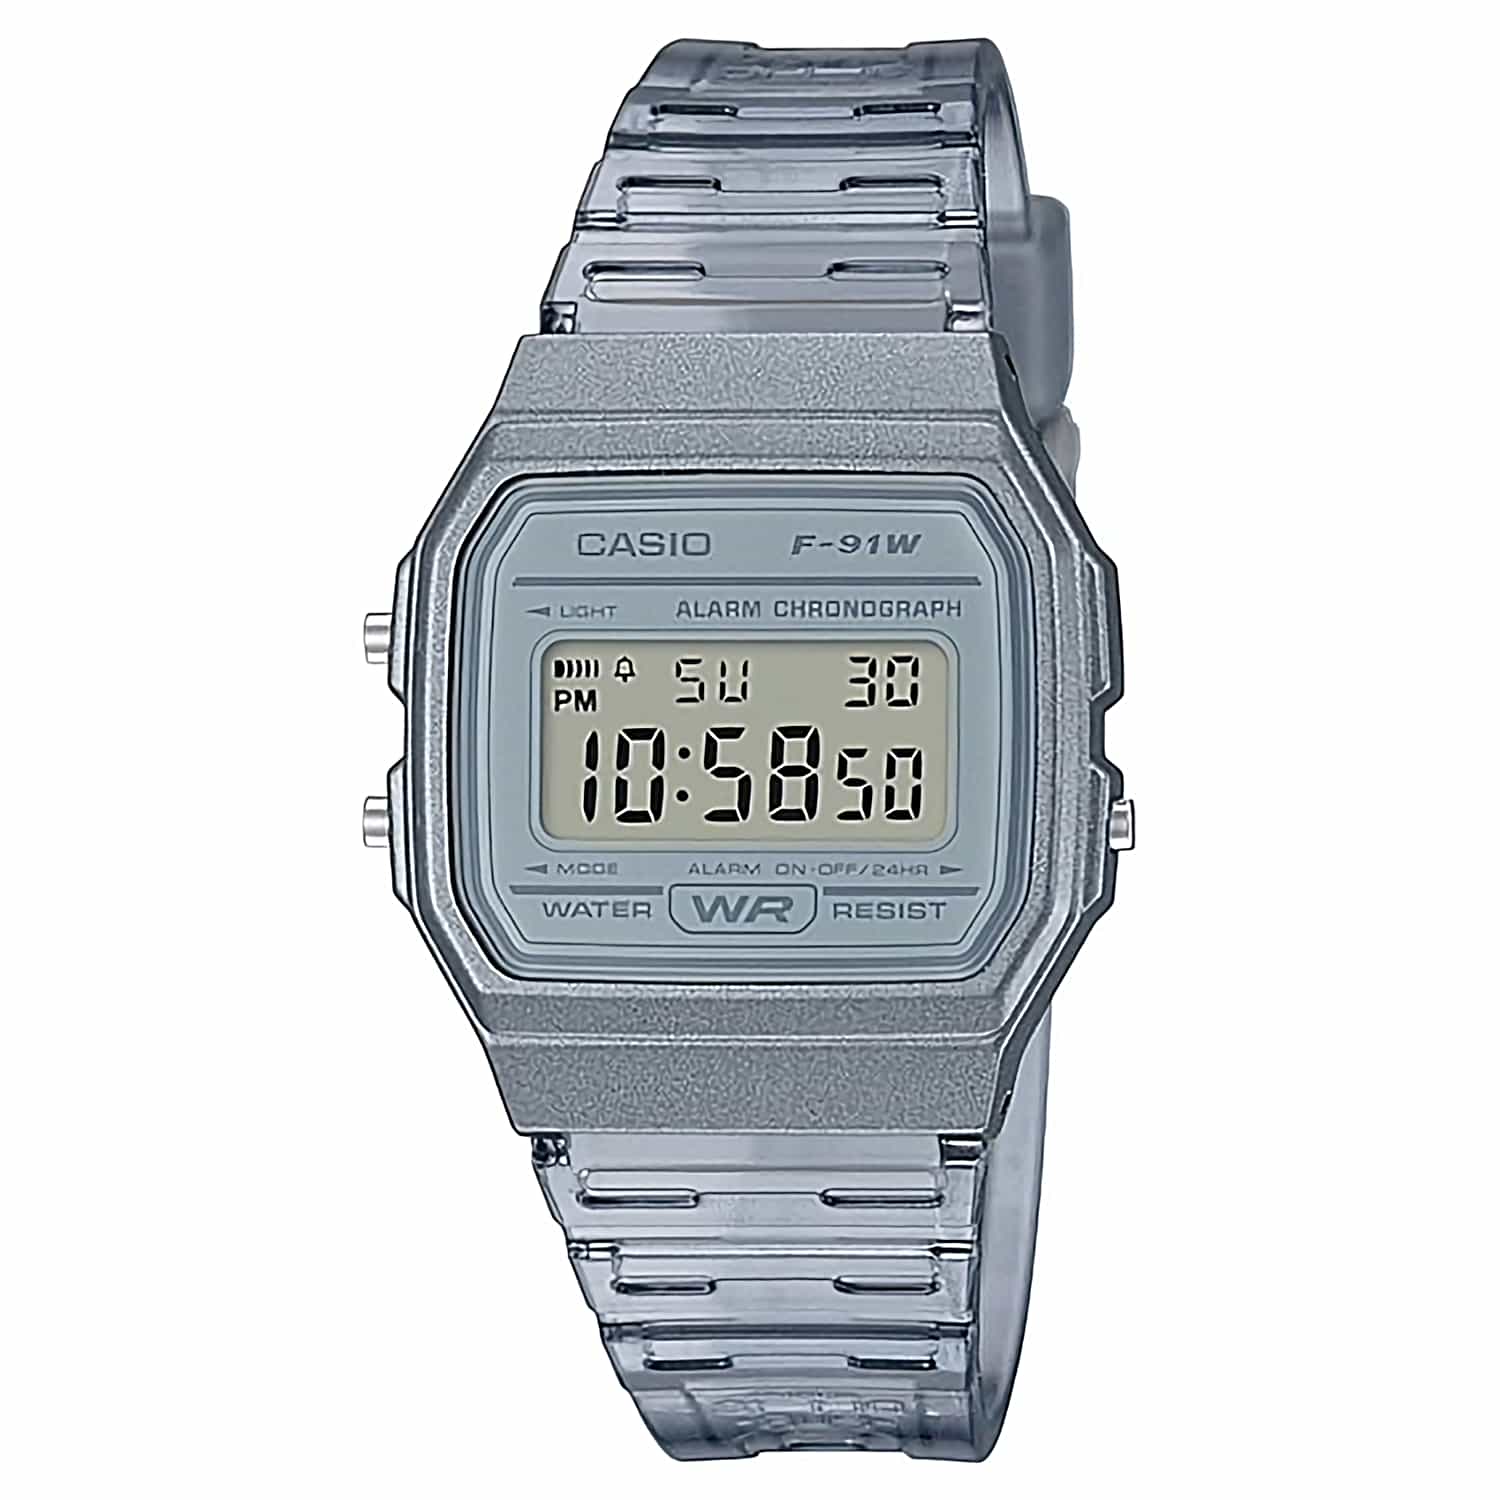 F91WS-8 Casio Digital Watch. A long time favourite Casio Digital Watch Afterpay - Split your purchase into 4 instalments - Pay for your purchase over 4 instalments, due every two weeks. You’ll pay your first installment at the time of pur where to buy mic